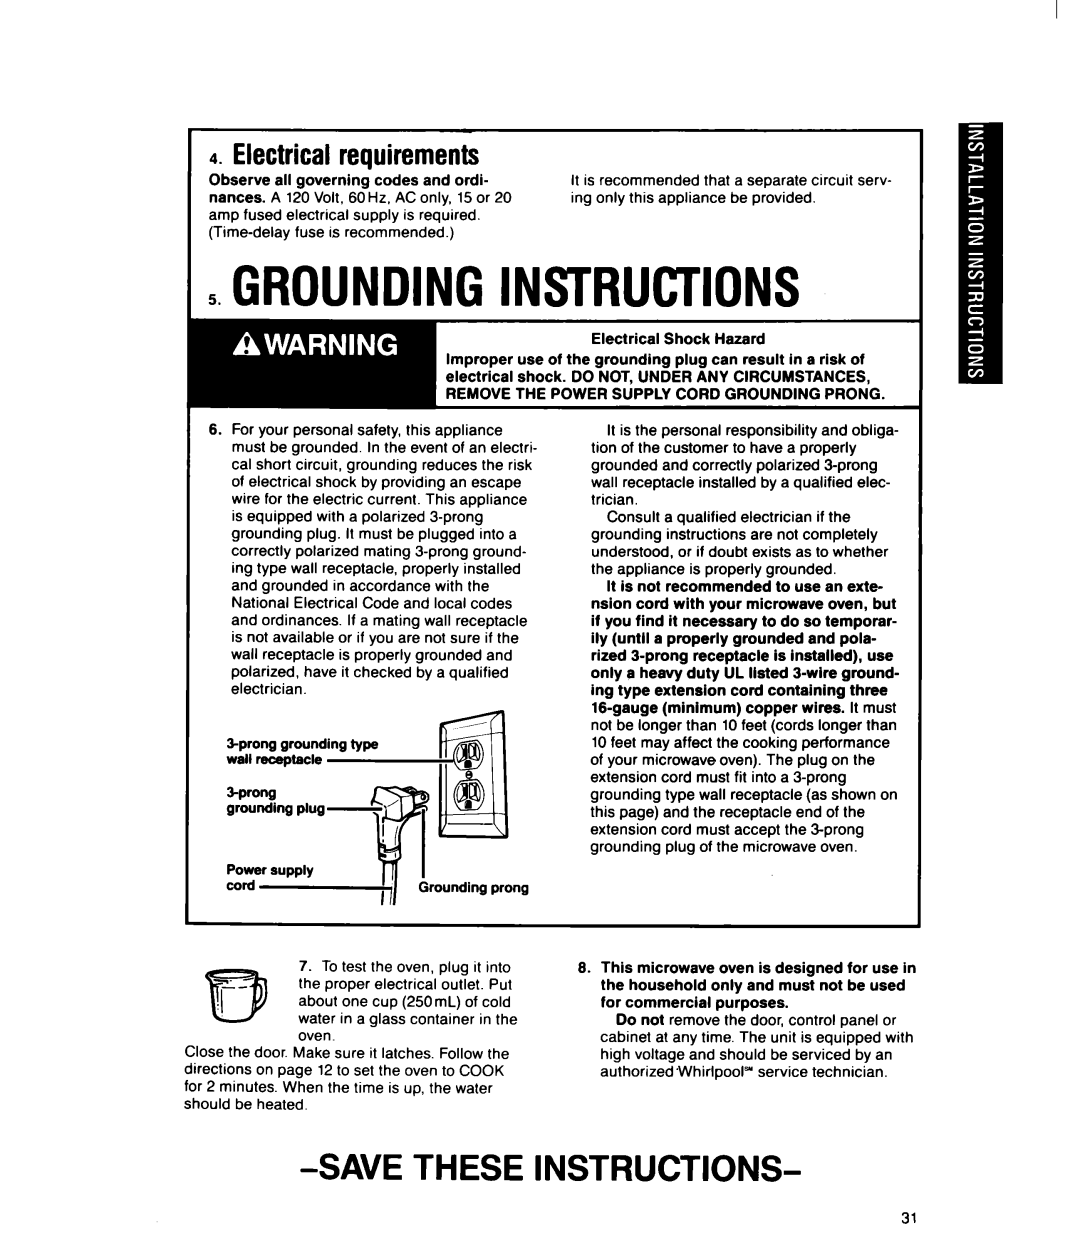 Whirlpool MT2100XY user manual 5GROUNDING.INSTRUCTIONS, Electrical requirements, Savethese Instructions 